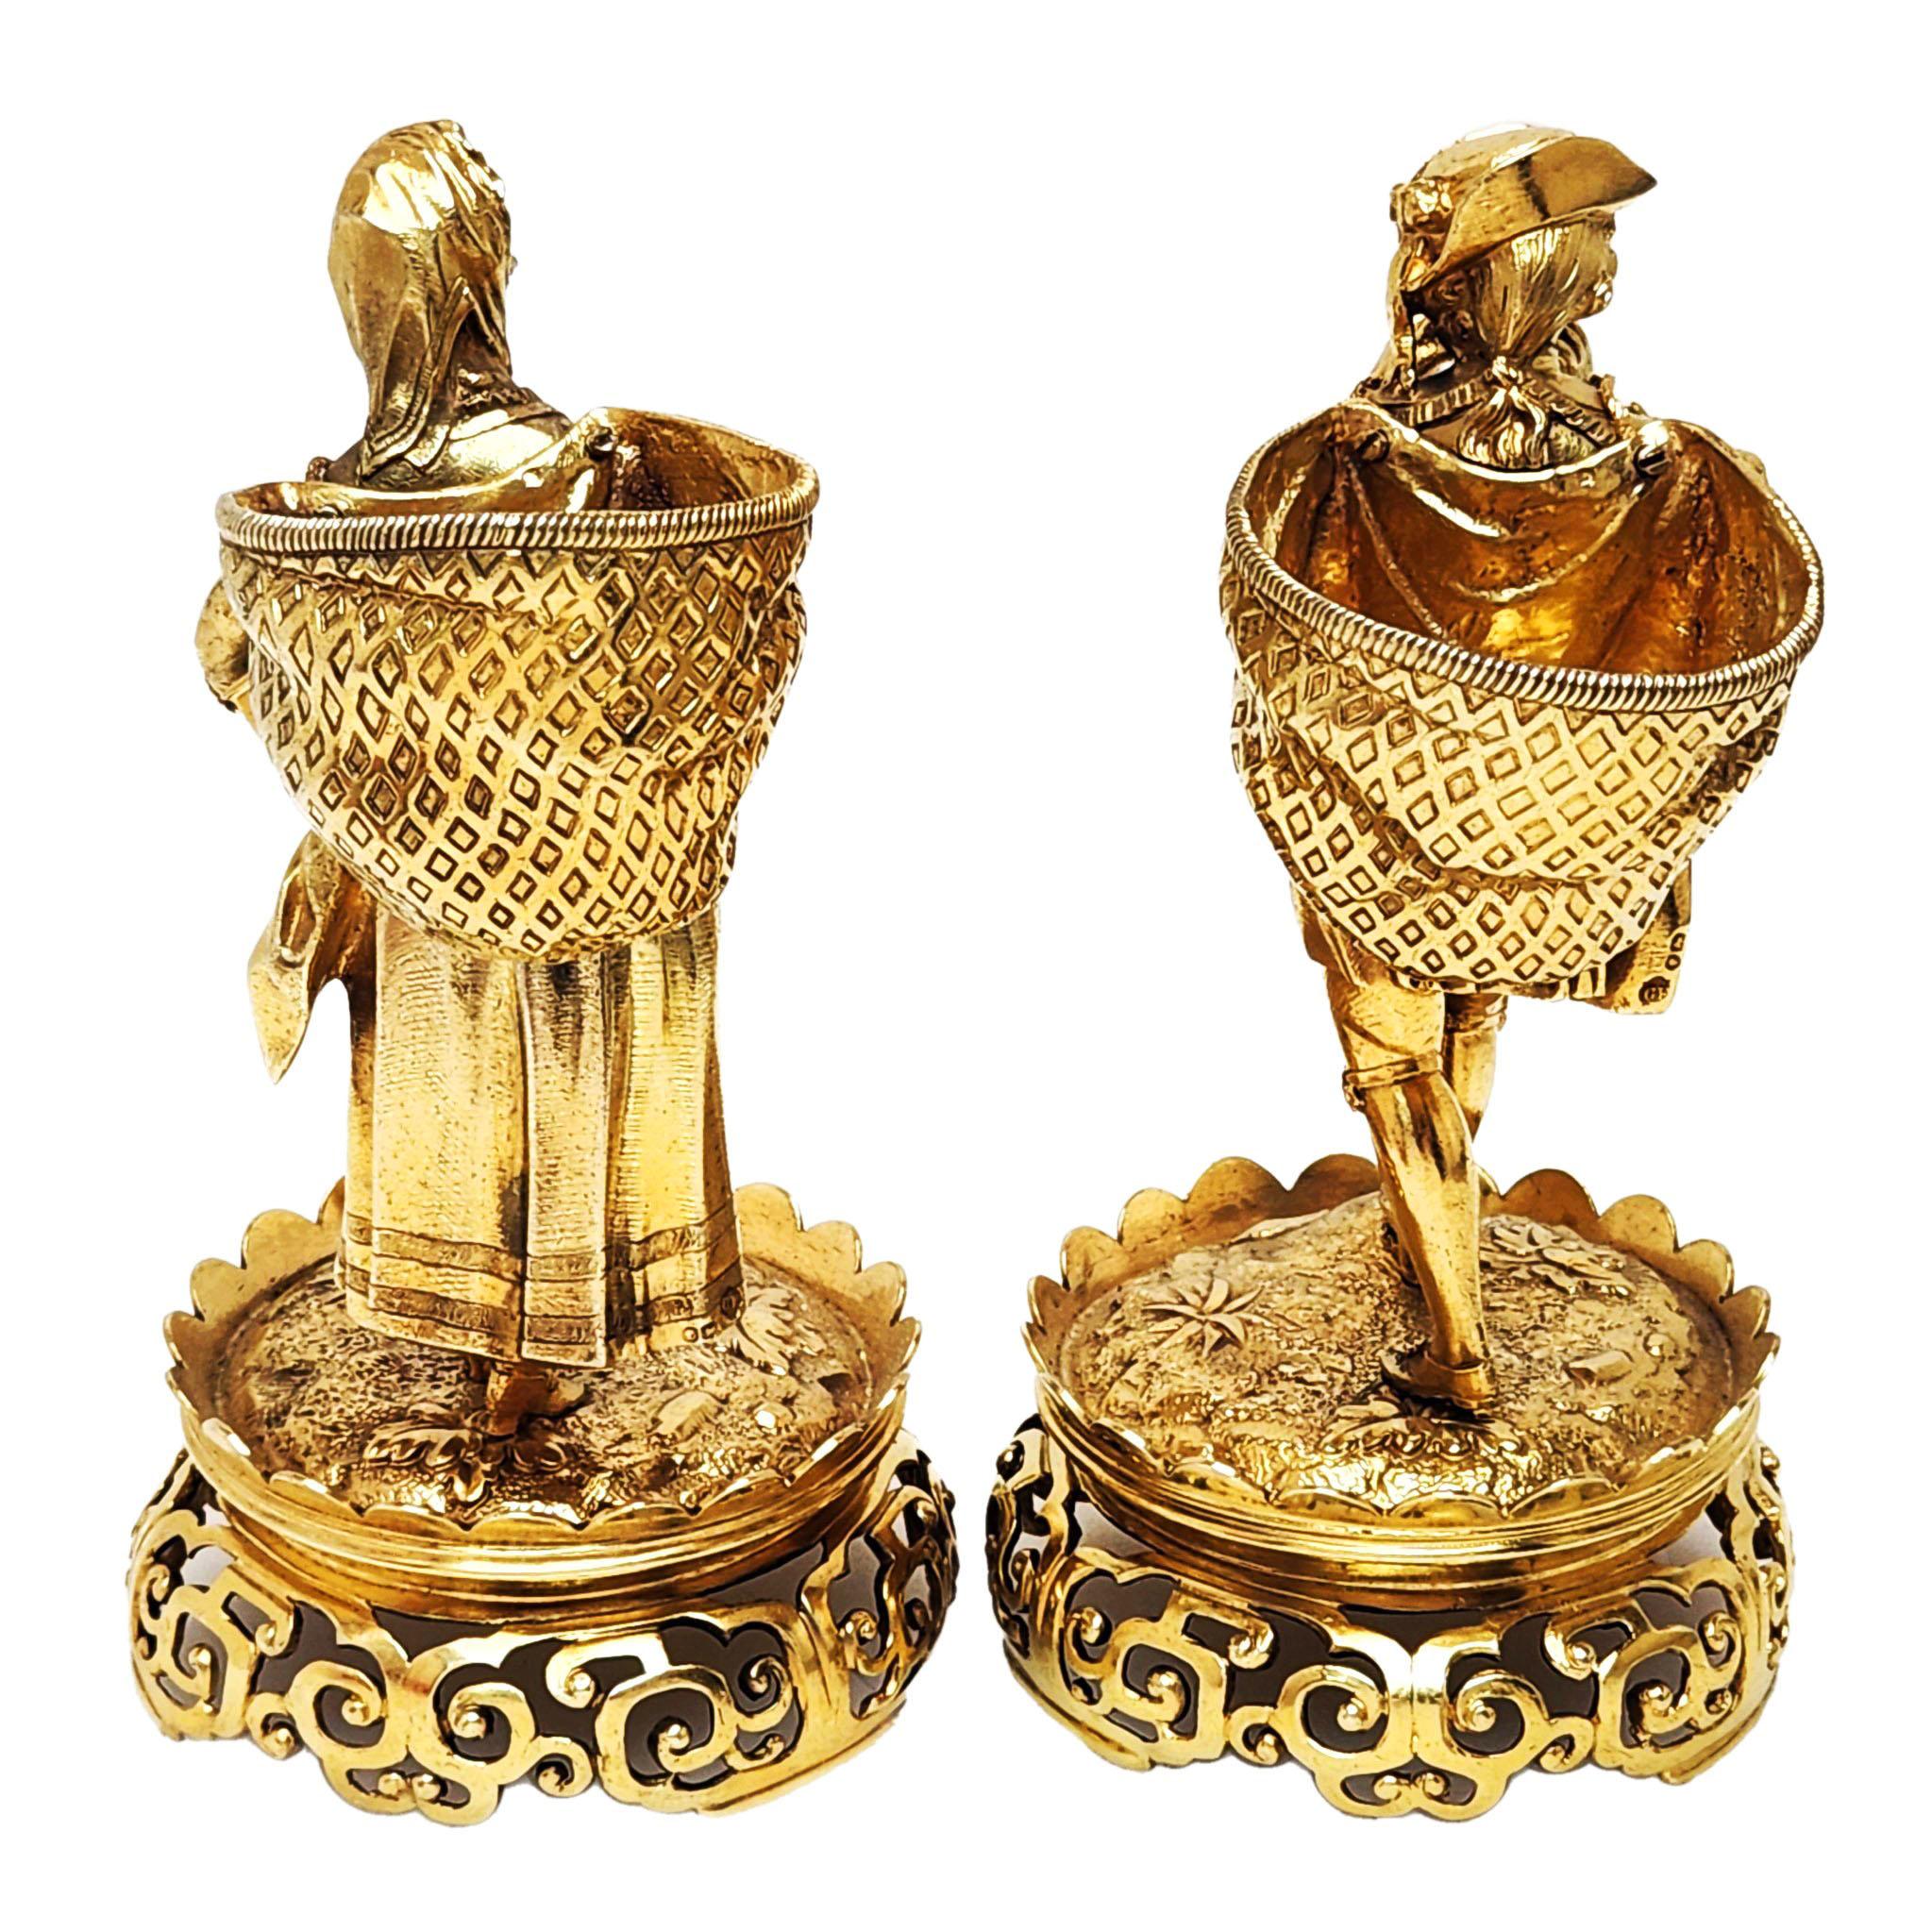 Pair Antique Victorian Sterling Silver Gilt Boy Girl Salts Sinch Pots 1873 In Good Condition For Sale In London, GB